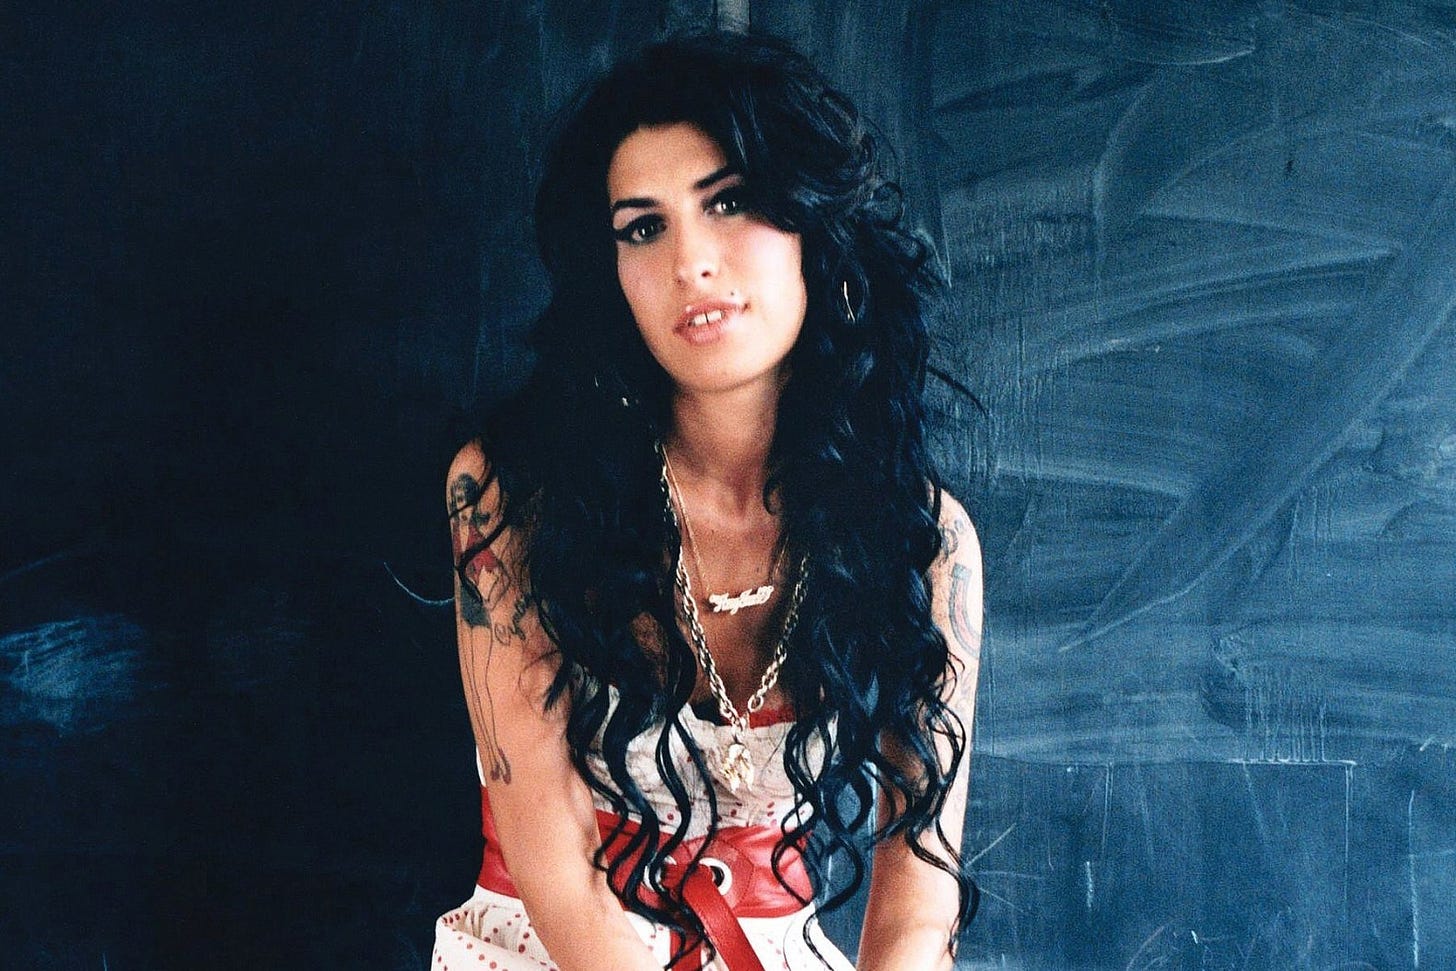 Amy Winehouse's Death: A Troubled Star Gone Too Soon